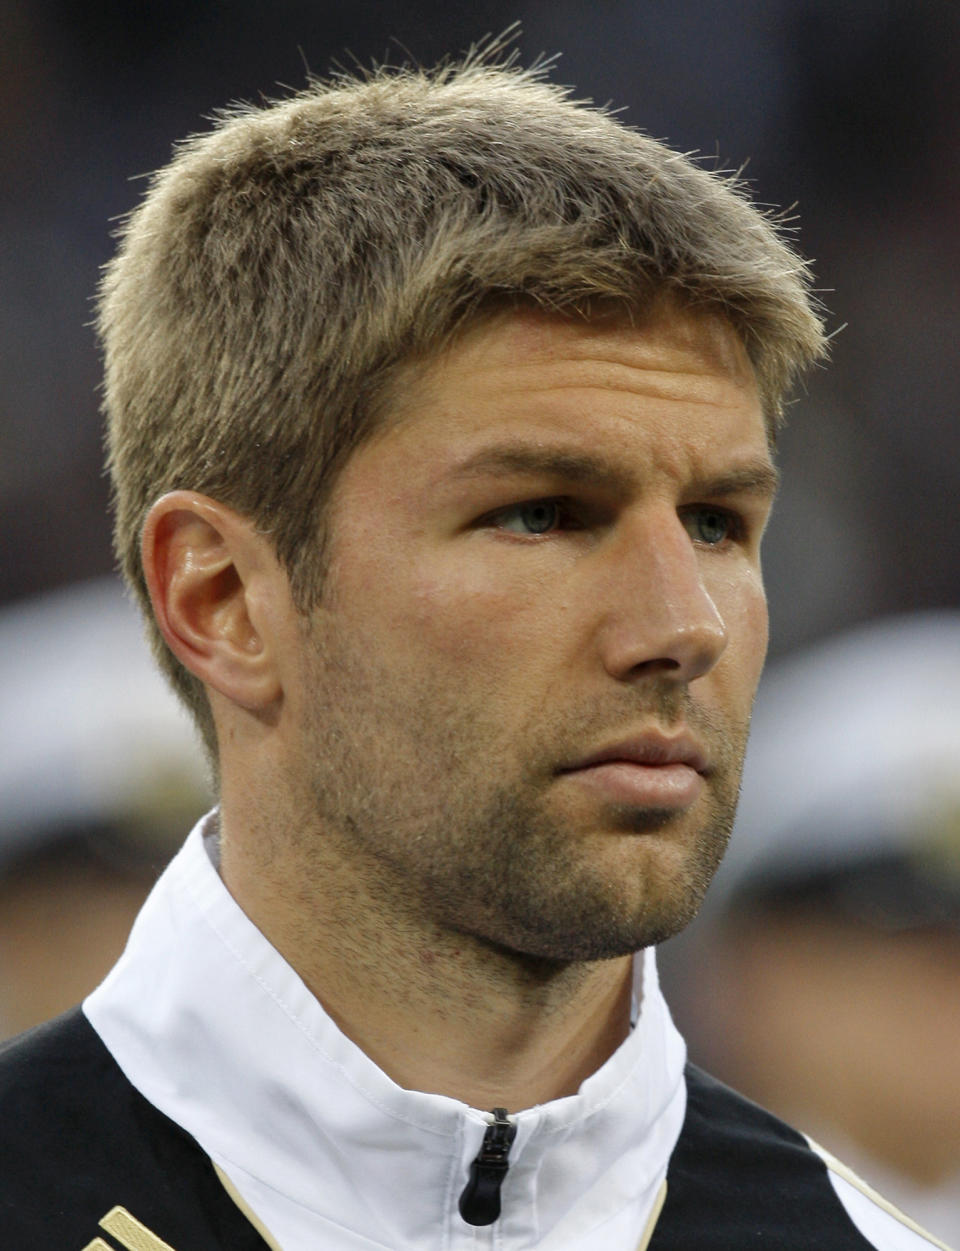 FILE - In this Oct. 14, 2009 file picture Germany's Thomas Hitzlsperger waits prior the World Cup Group 4 qualifying soccer match between Germany and Finland in Hamburg, northern Germany. Former Germany midfielder Thomas Hitzlsperger announced he is gay on Wednesday Jan. 8, 2014, becoming likely the most prominent footballer yet to break a long-standing taboo within the sport. Hitzlsperger says in an interview given to Die Zeit newspaper, “I am expressing my sexuality because I want to promote the discussion of homosexuality among professional athletes.” The 31-year-old says he felt now was the right time, four months after retirement following a career in England, Italy and Germany, to approach a subject he feels is “simply ignored.” (AP Photo/Joerg Sarbach,file)